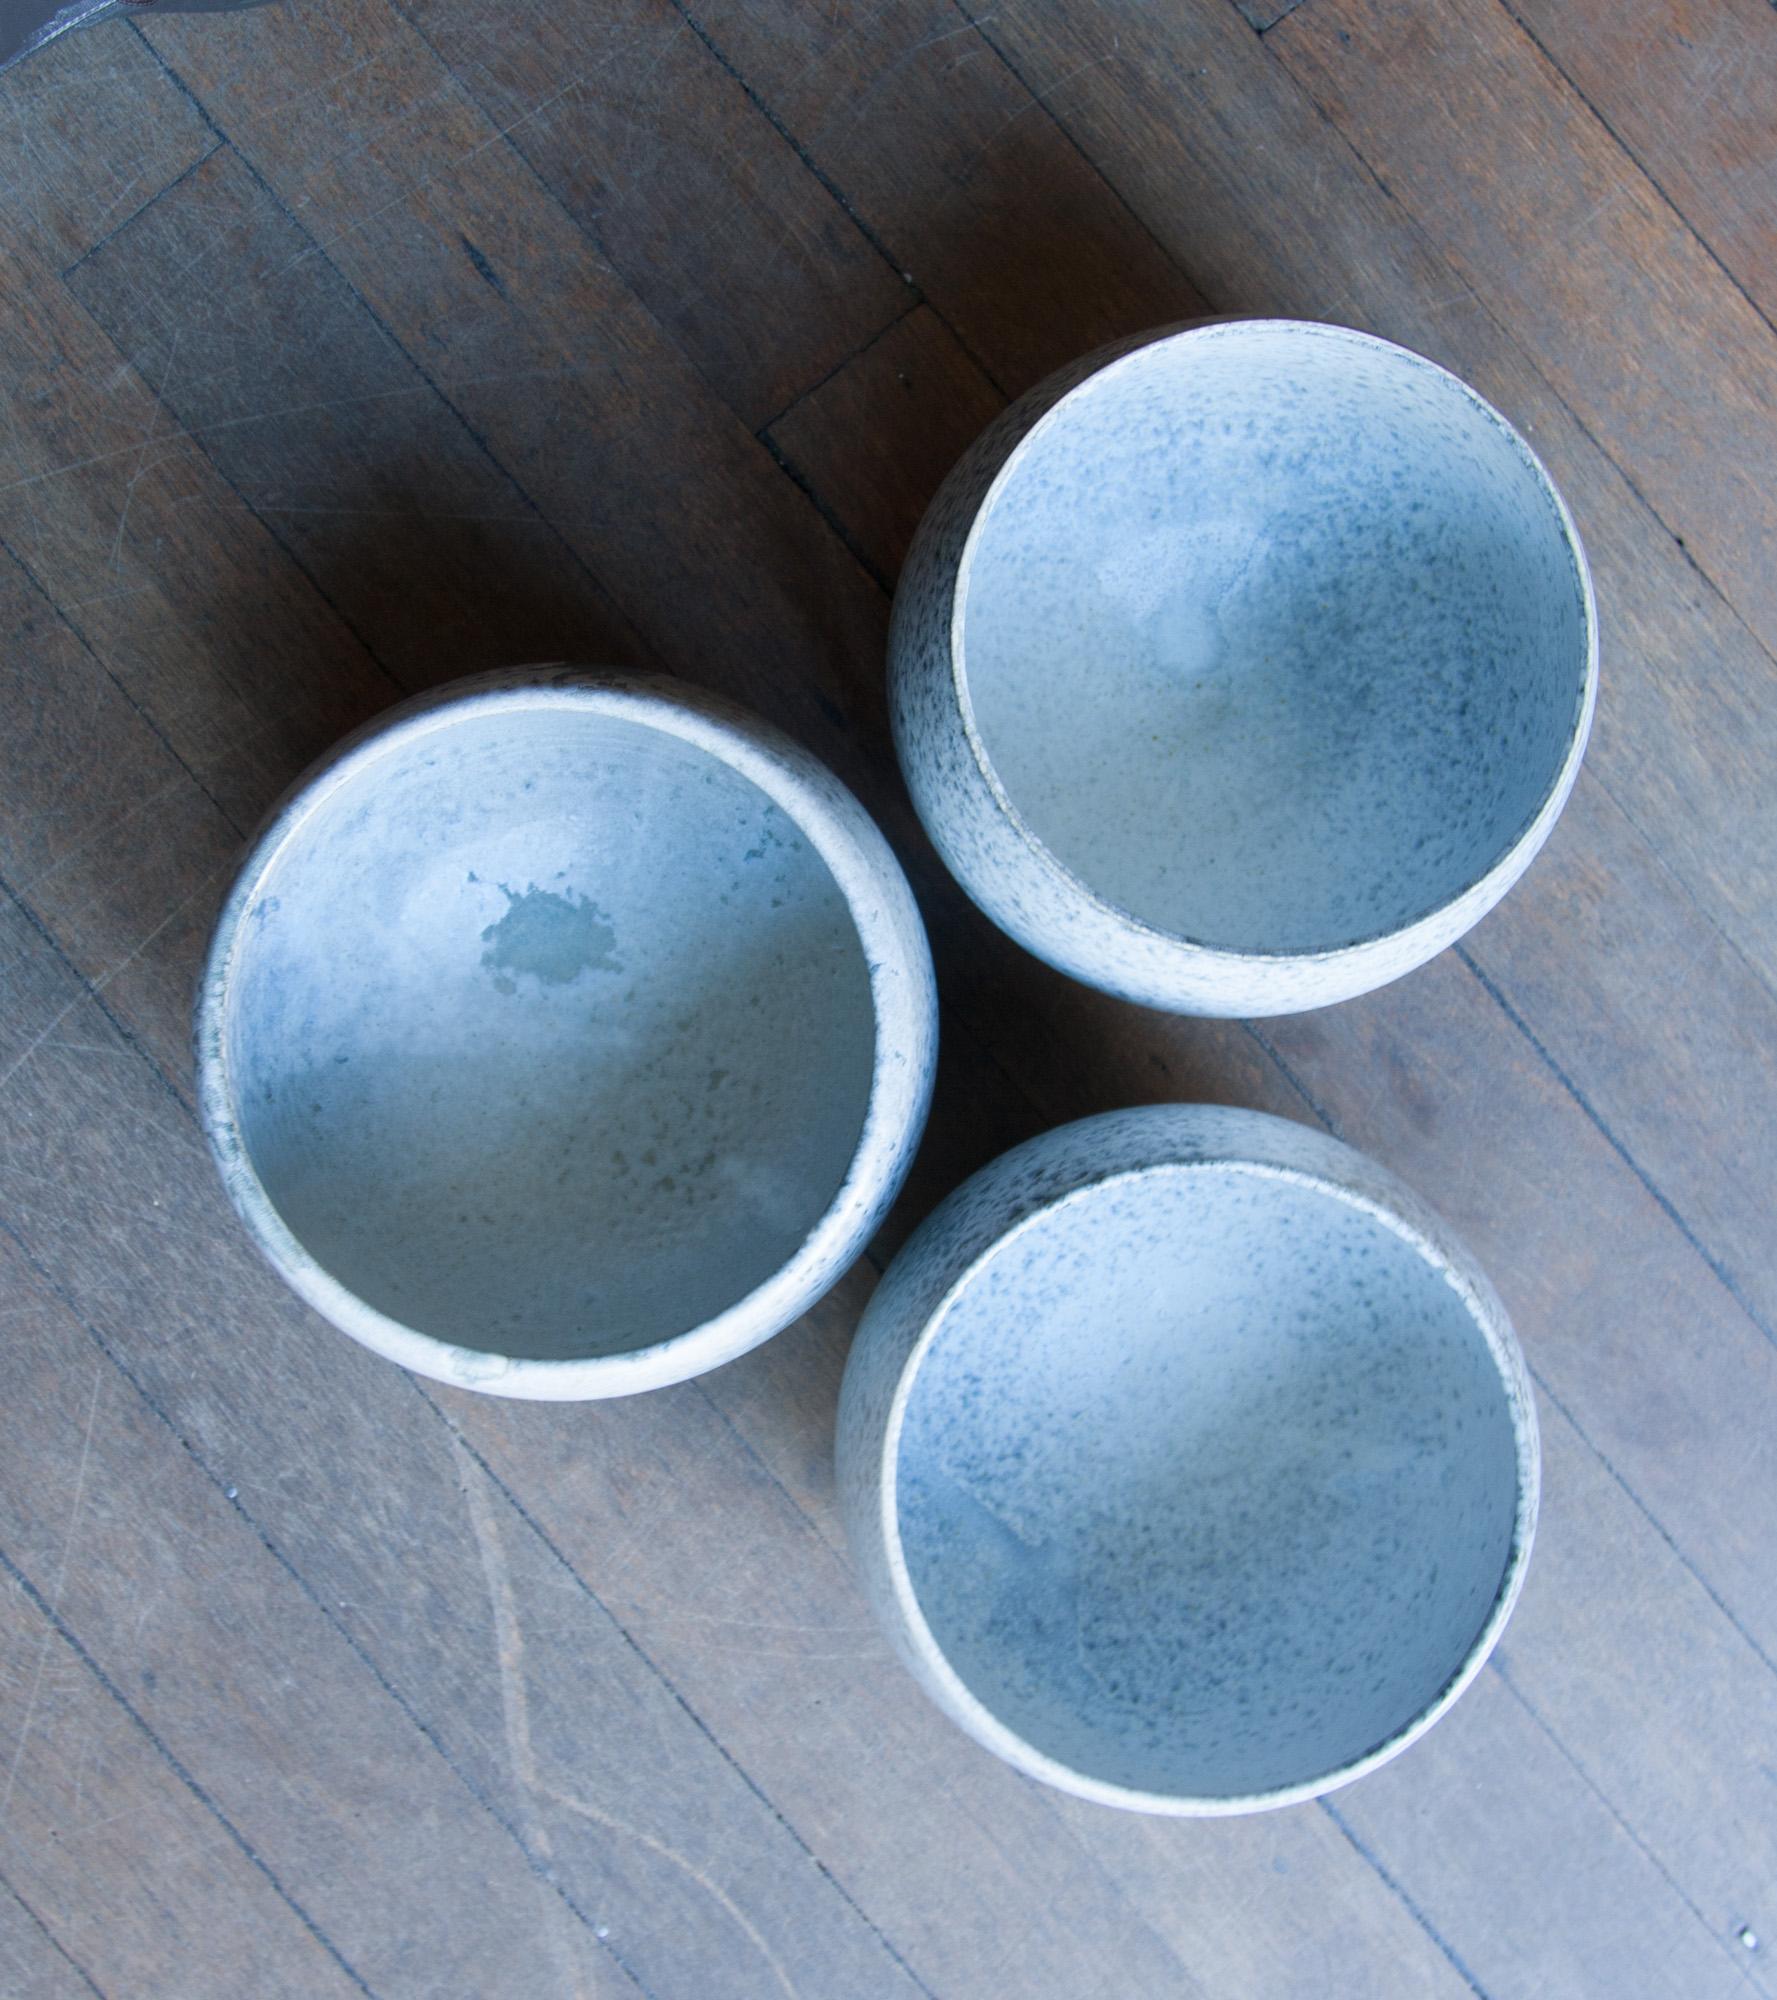 Aage and Kasper Würtz are a father and son team of studio ceramicists based near Horsens in eastern Jutland, Denmark. Known internationally for their hand-thrown and hand-glazed ceramics they have produced bespoke collections for distinguished Fine